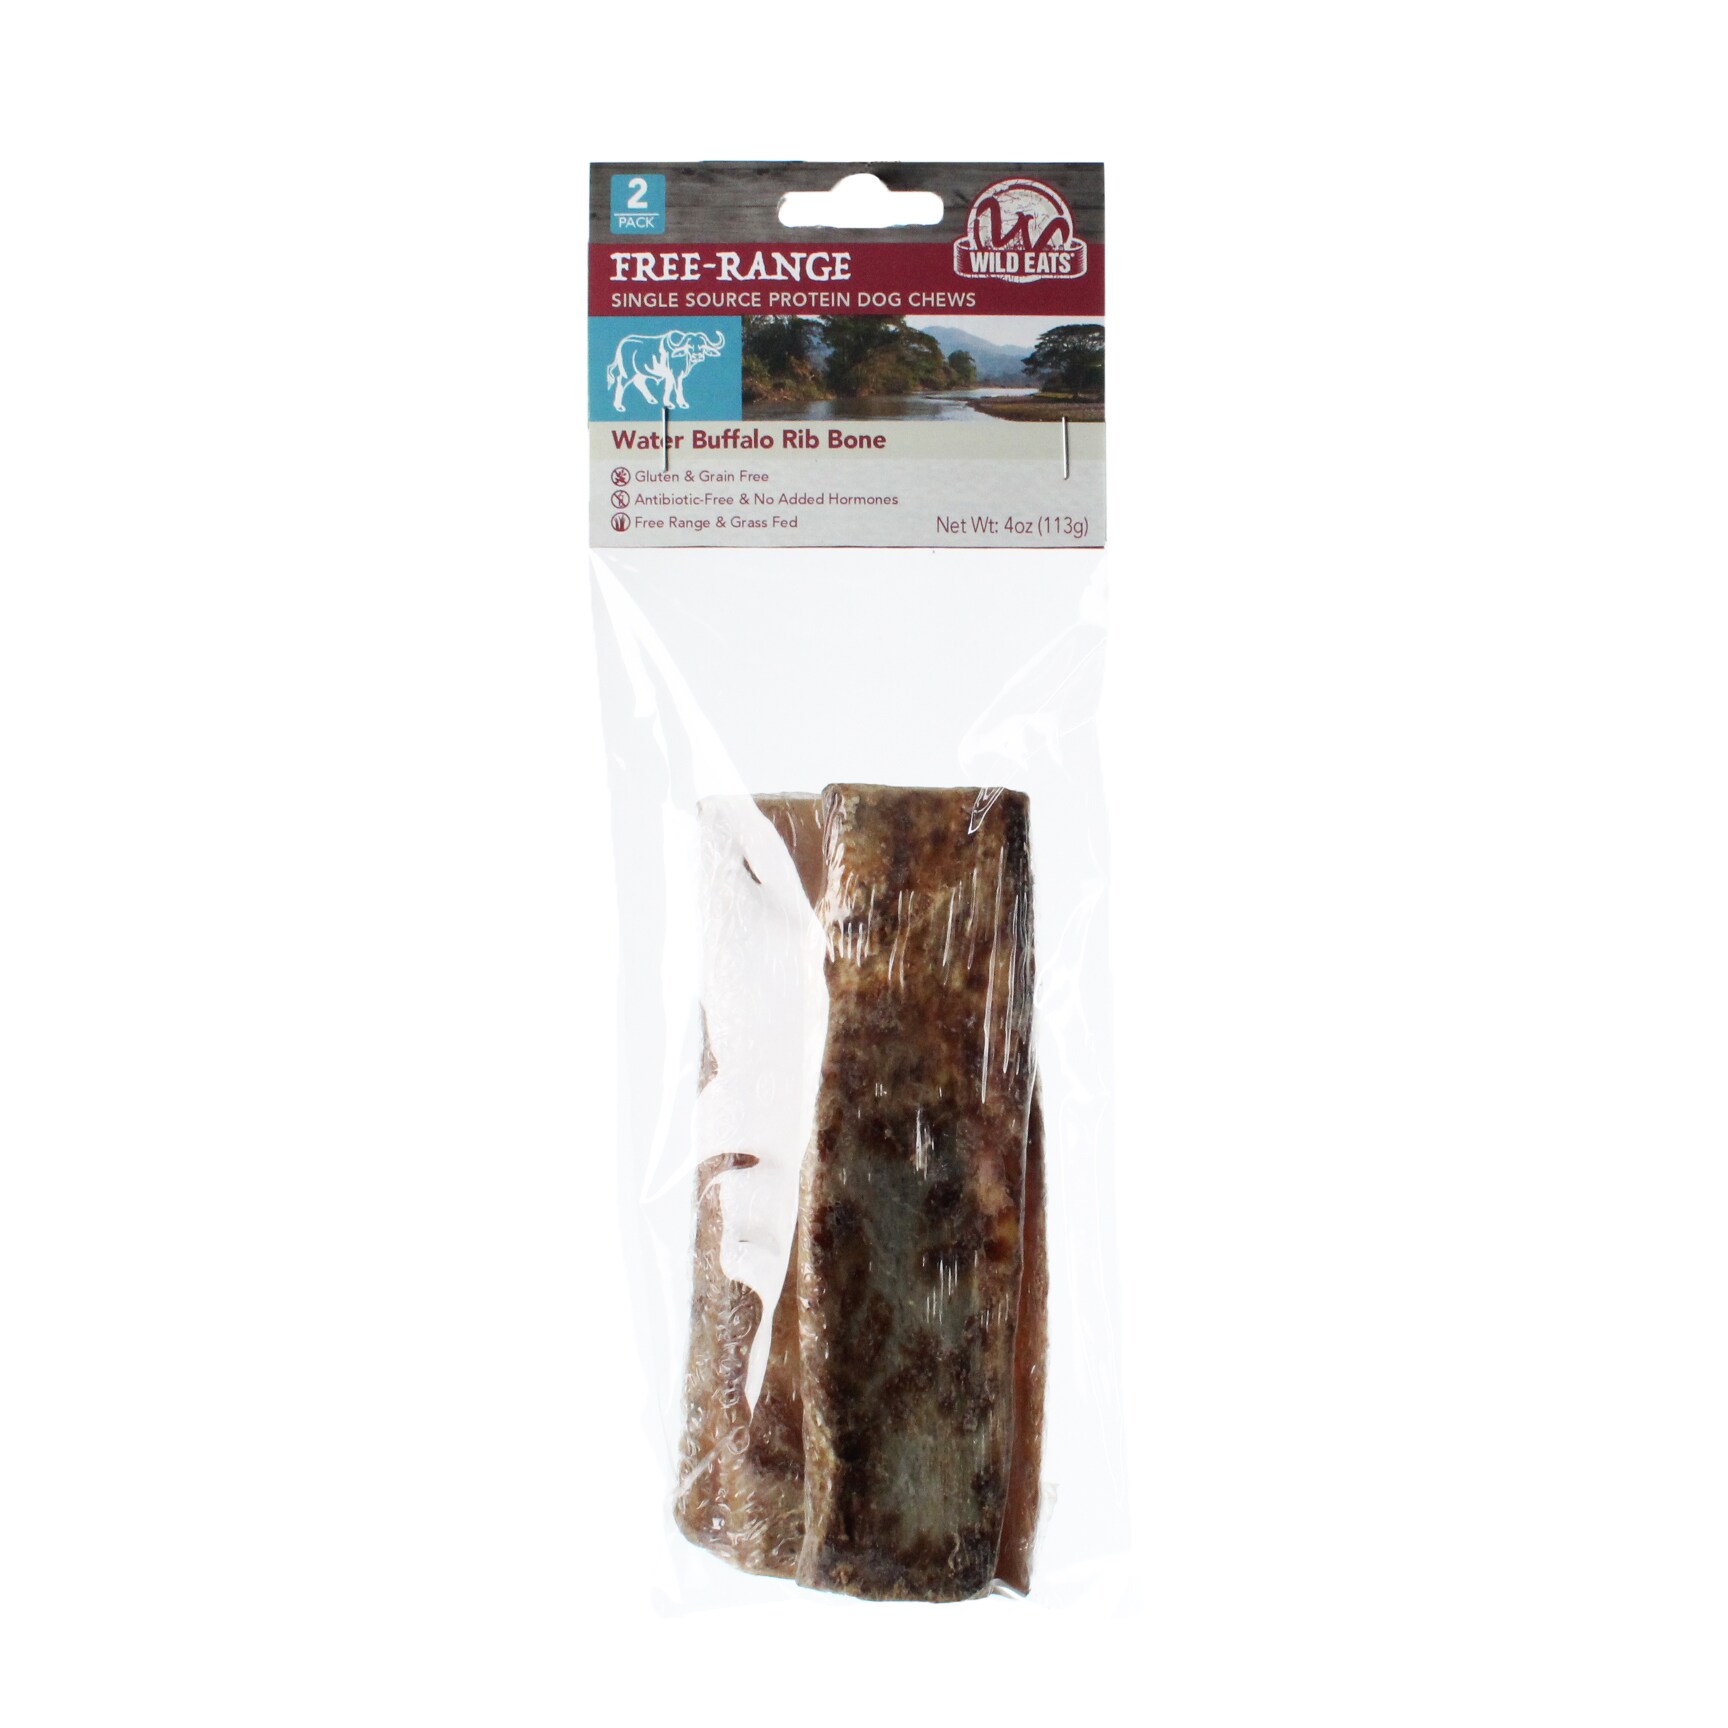 Are Water Buffalo Rib Bones Safe For Dogs